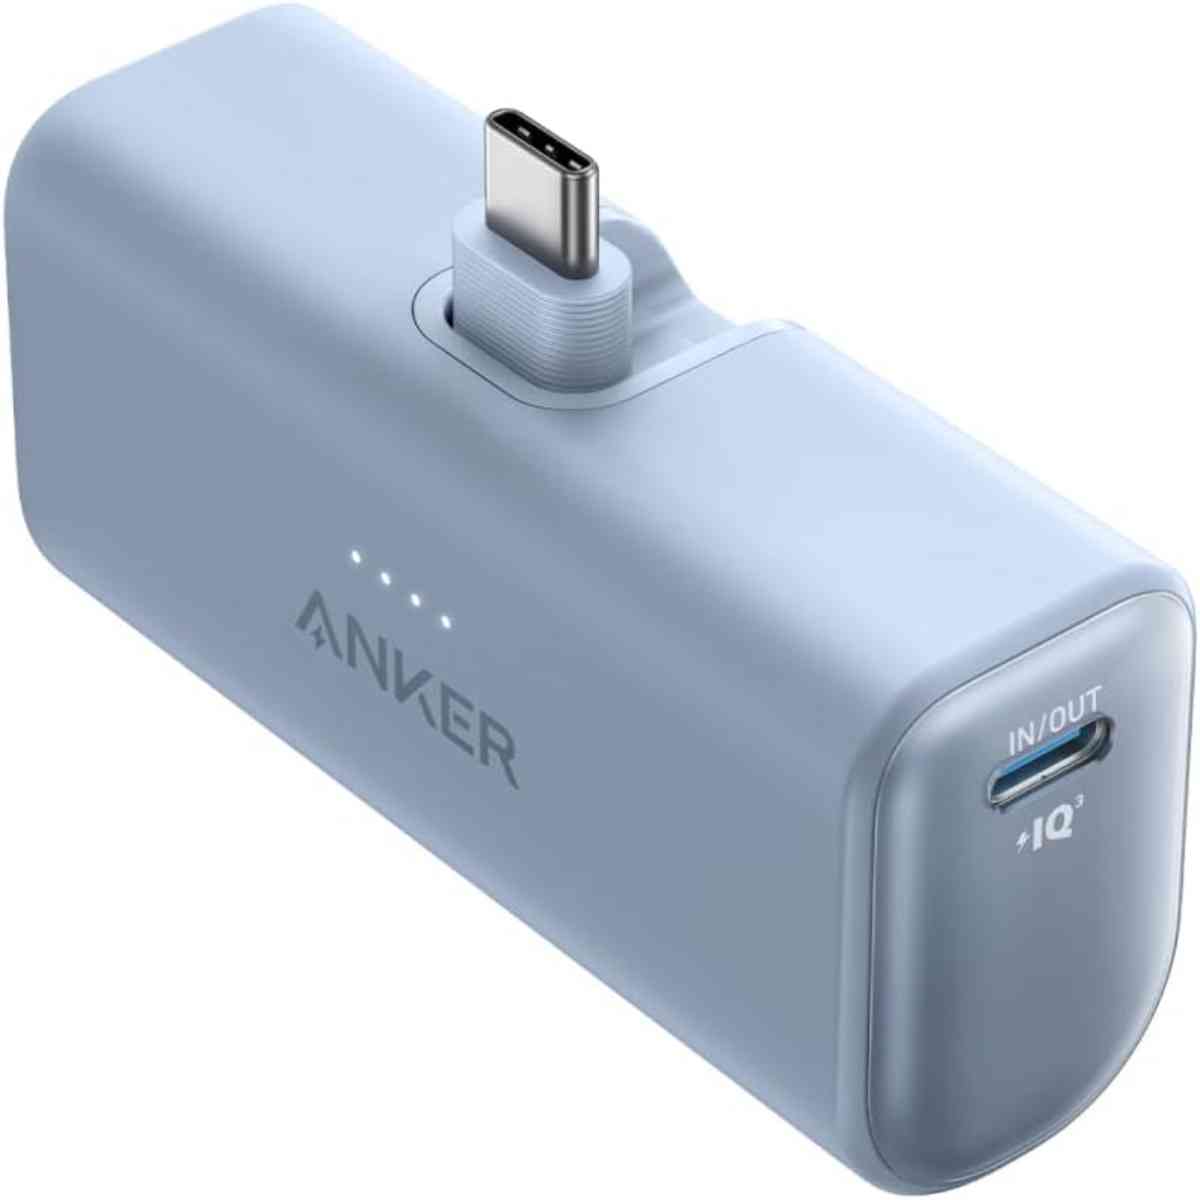 Ankerの「Anker Nano Power Bank (22.5W, Built-In USB-C Connector)」